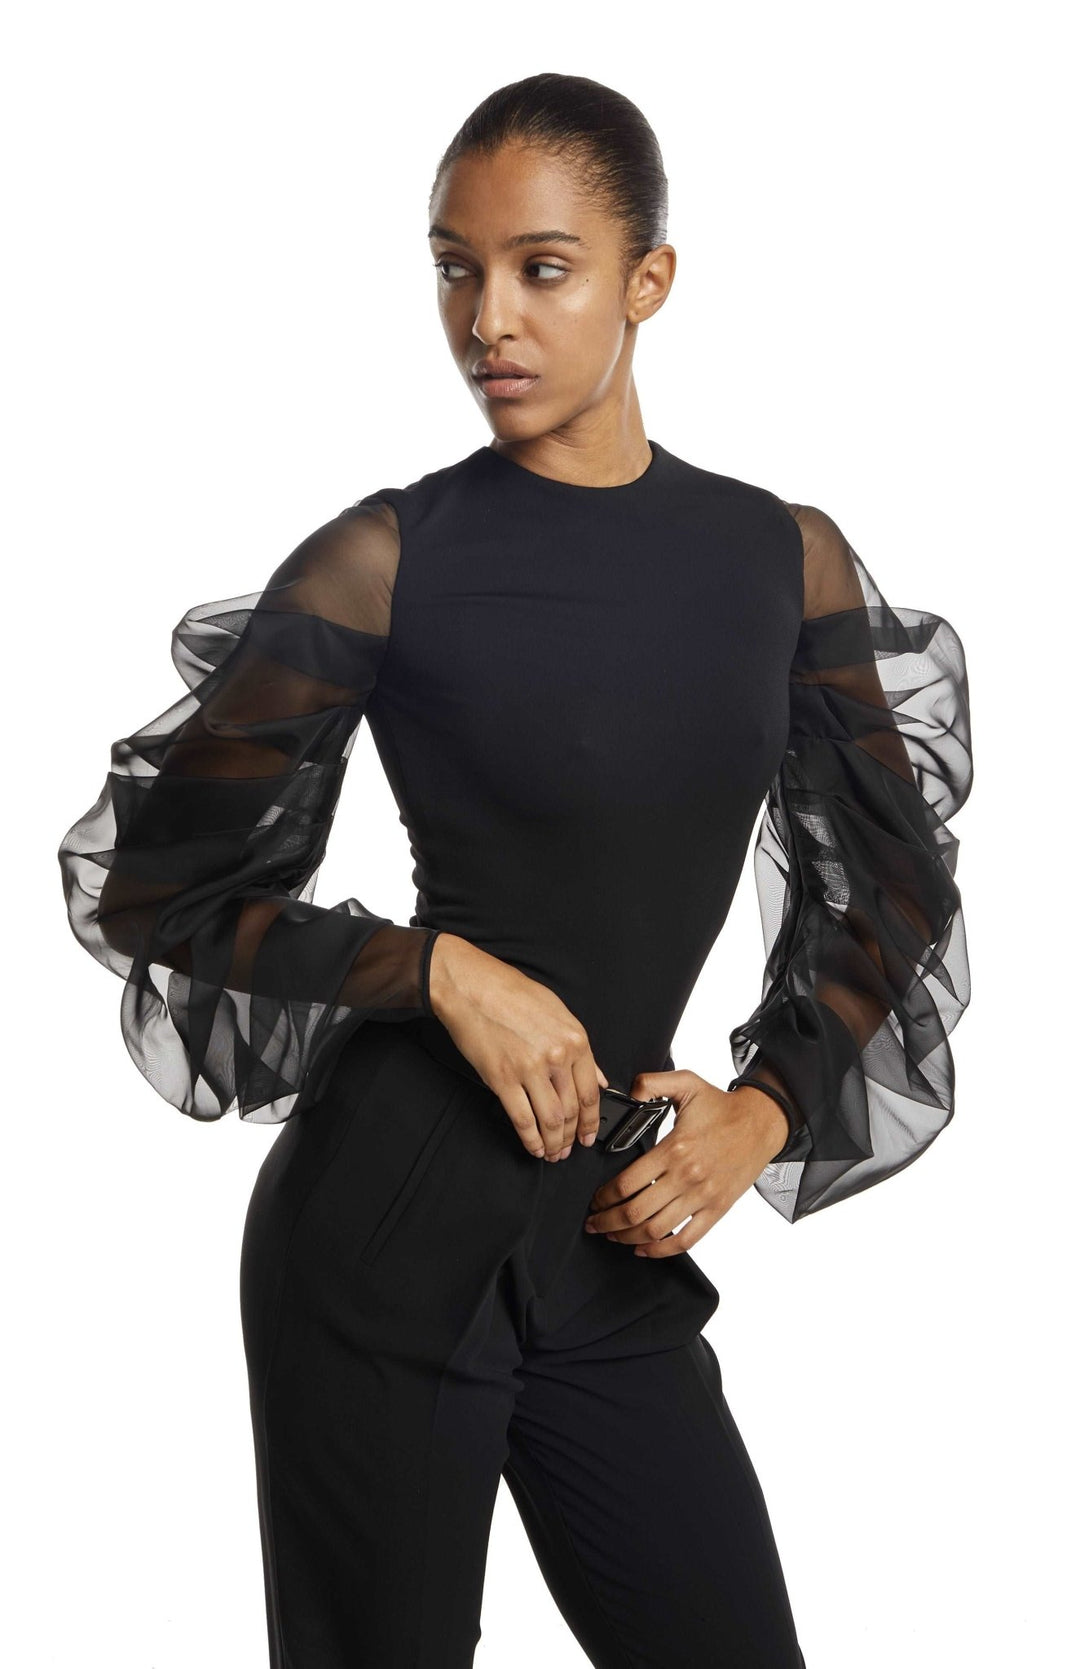 Black, slim fit designer top, in jersey knit, with closed neck, oversized, draped, sheer, sleeves in silk organza